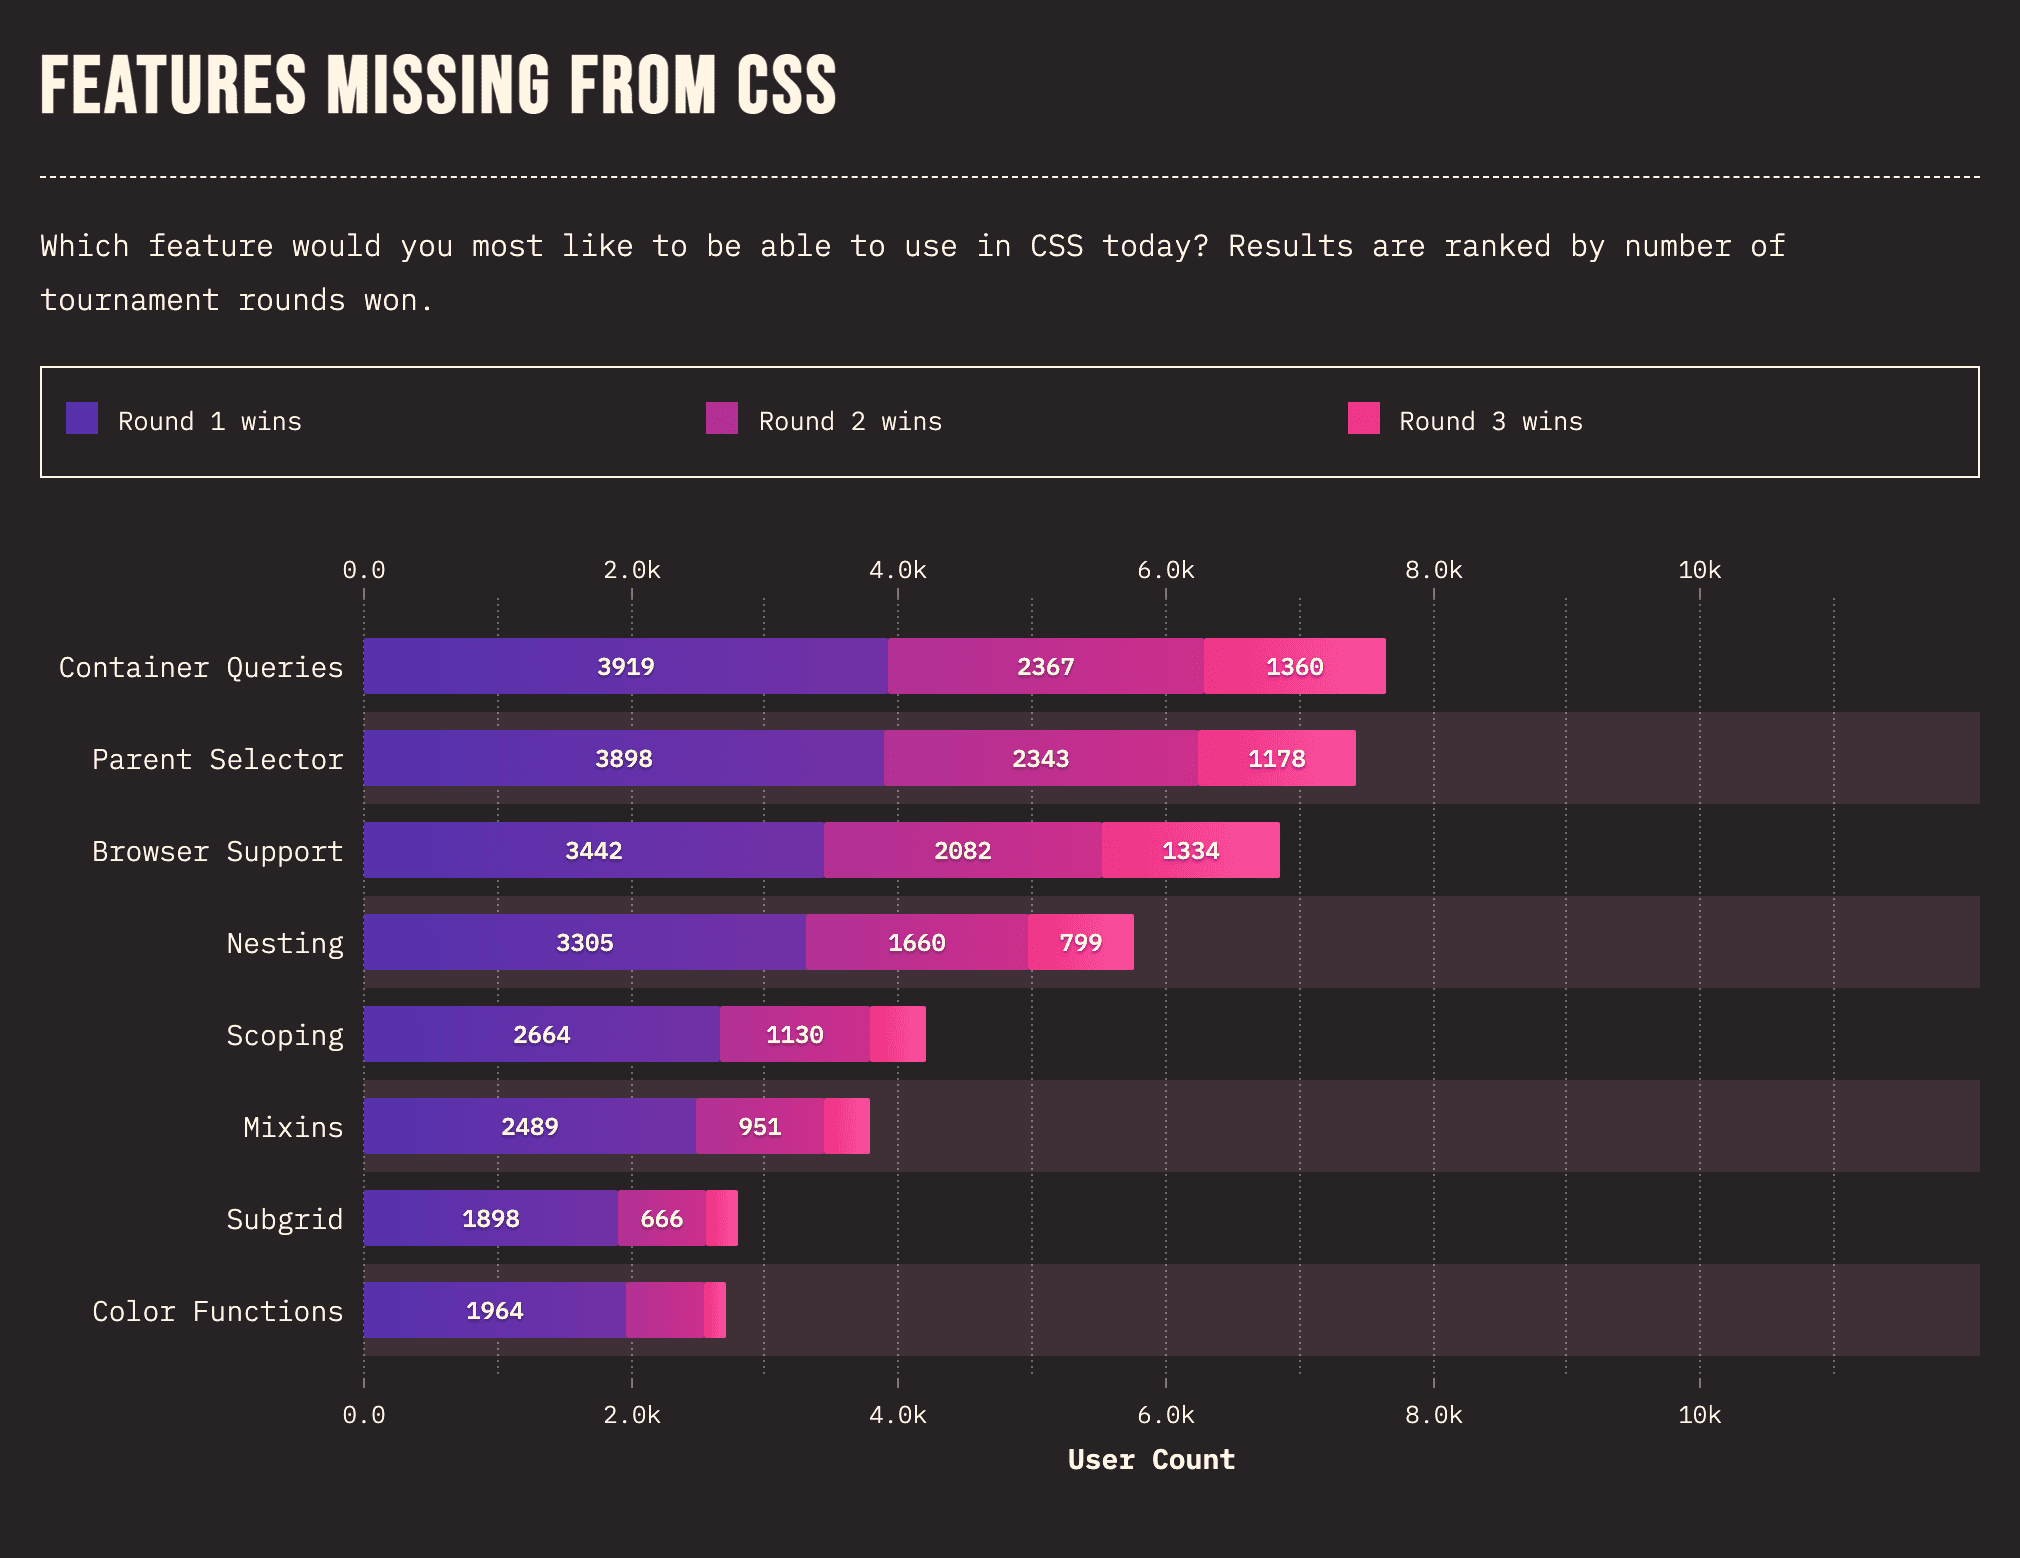 Survey results for the question what's missing in CSS. The top three responses are container queries, parent selector, and browser support.